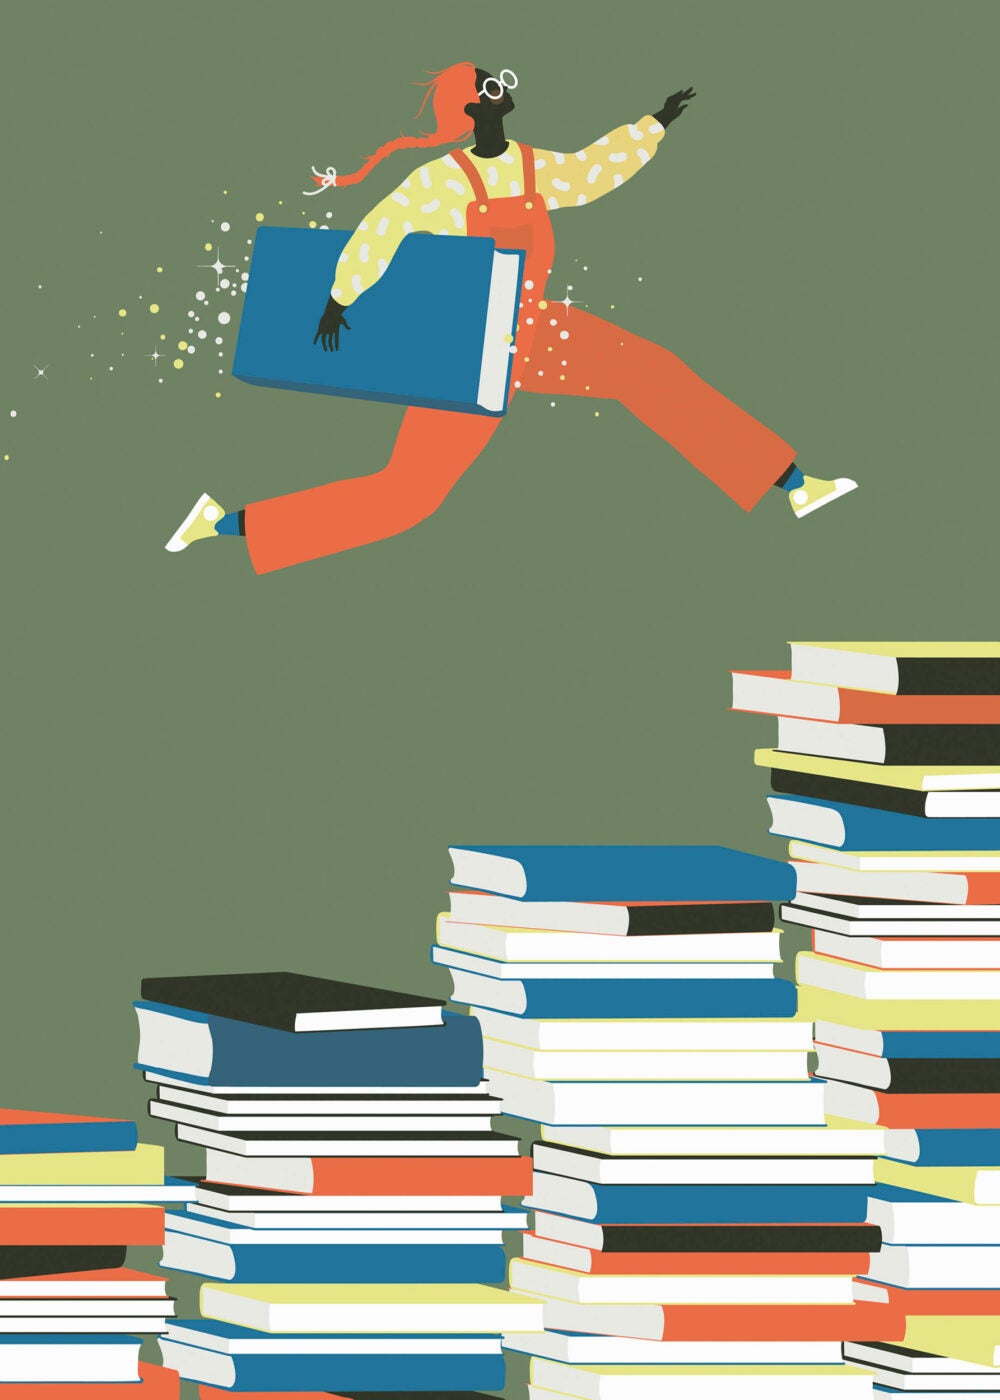 Young person leaping across stacks of books.